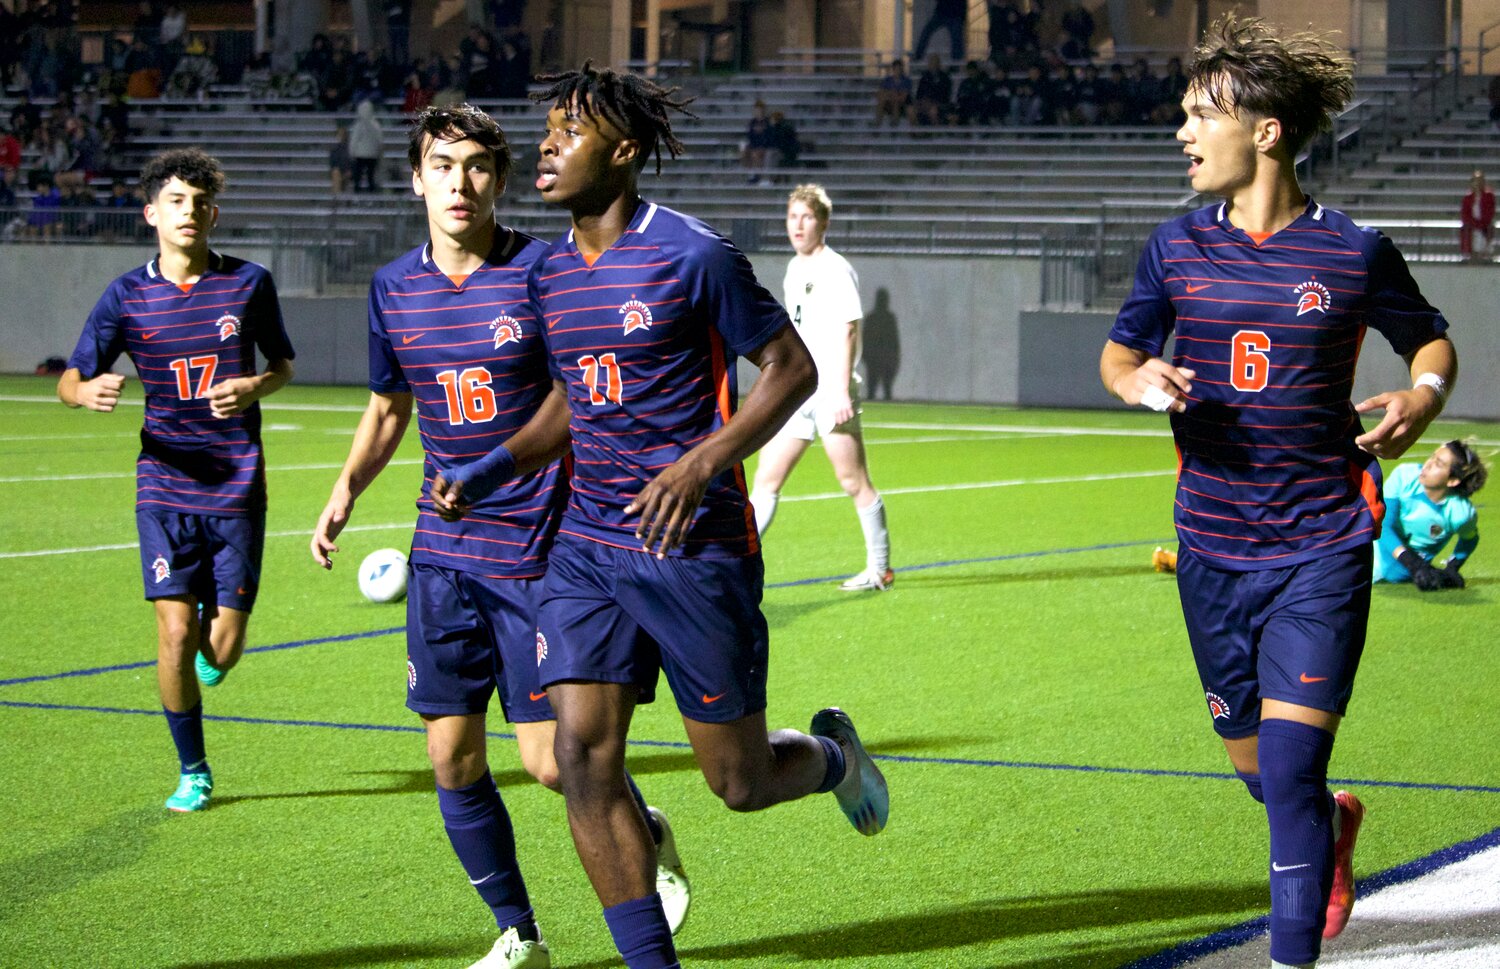 Seven Lakes players run towards the corner flag after Kortay Koc scored a goal during Friday’s game between Seven Lakes and Jordan at Legacy Stadium.